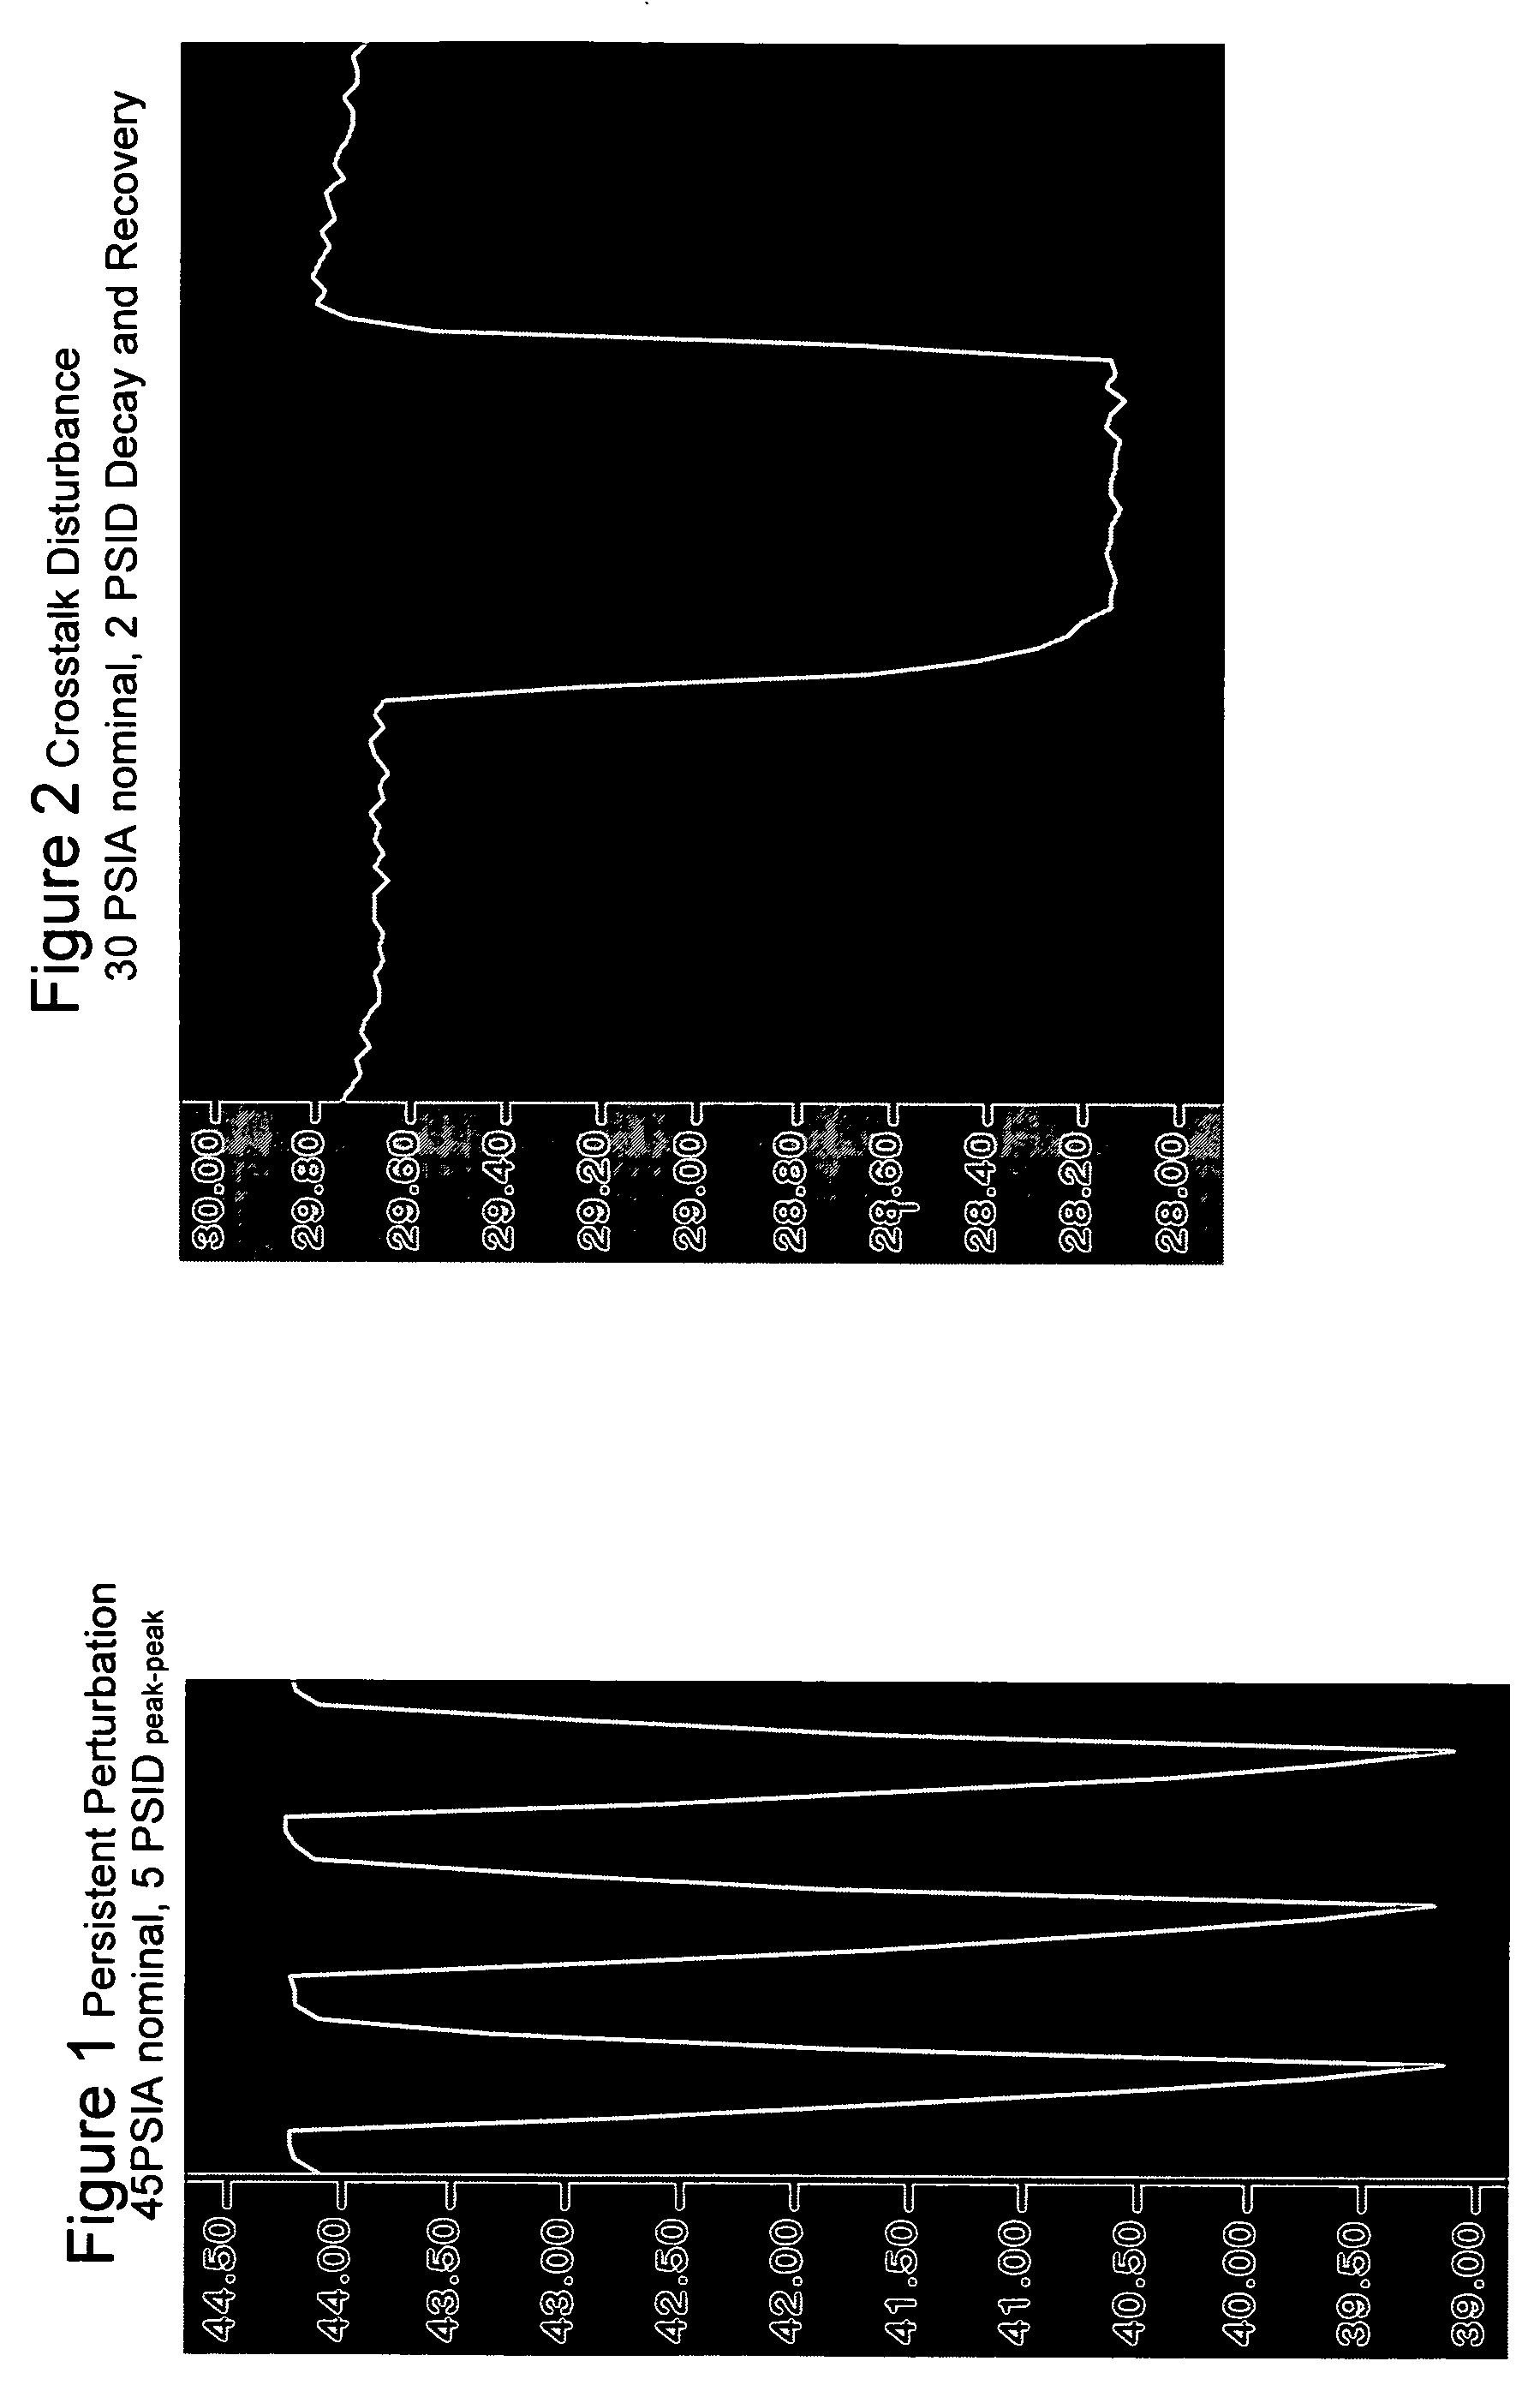 Method and system for a mass flow controller with reduced pressure sensitivity